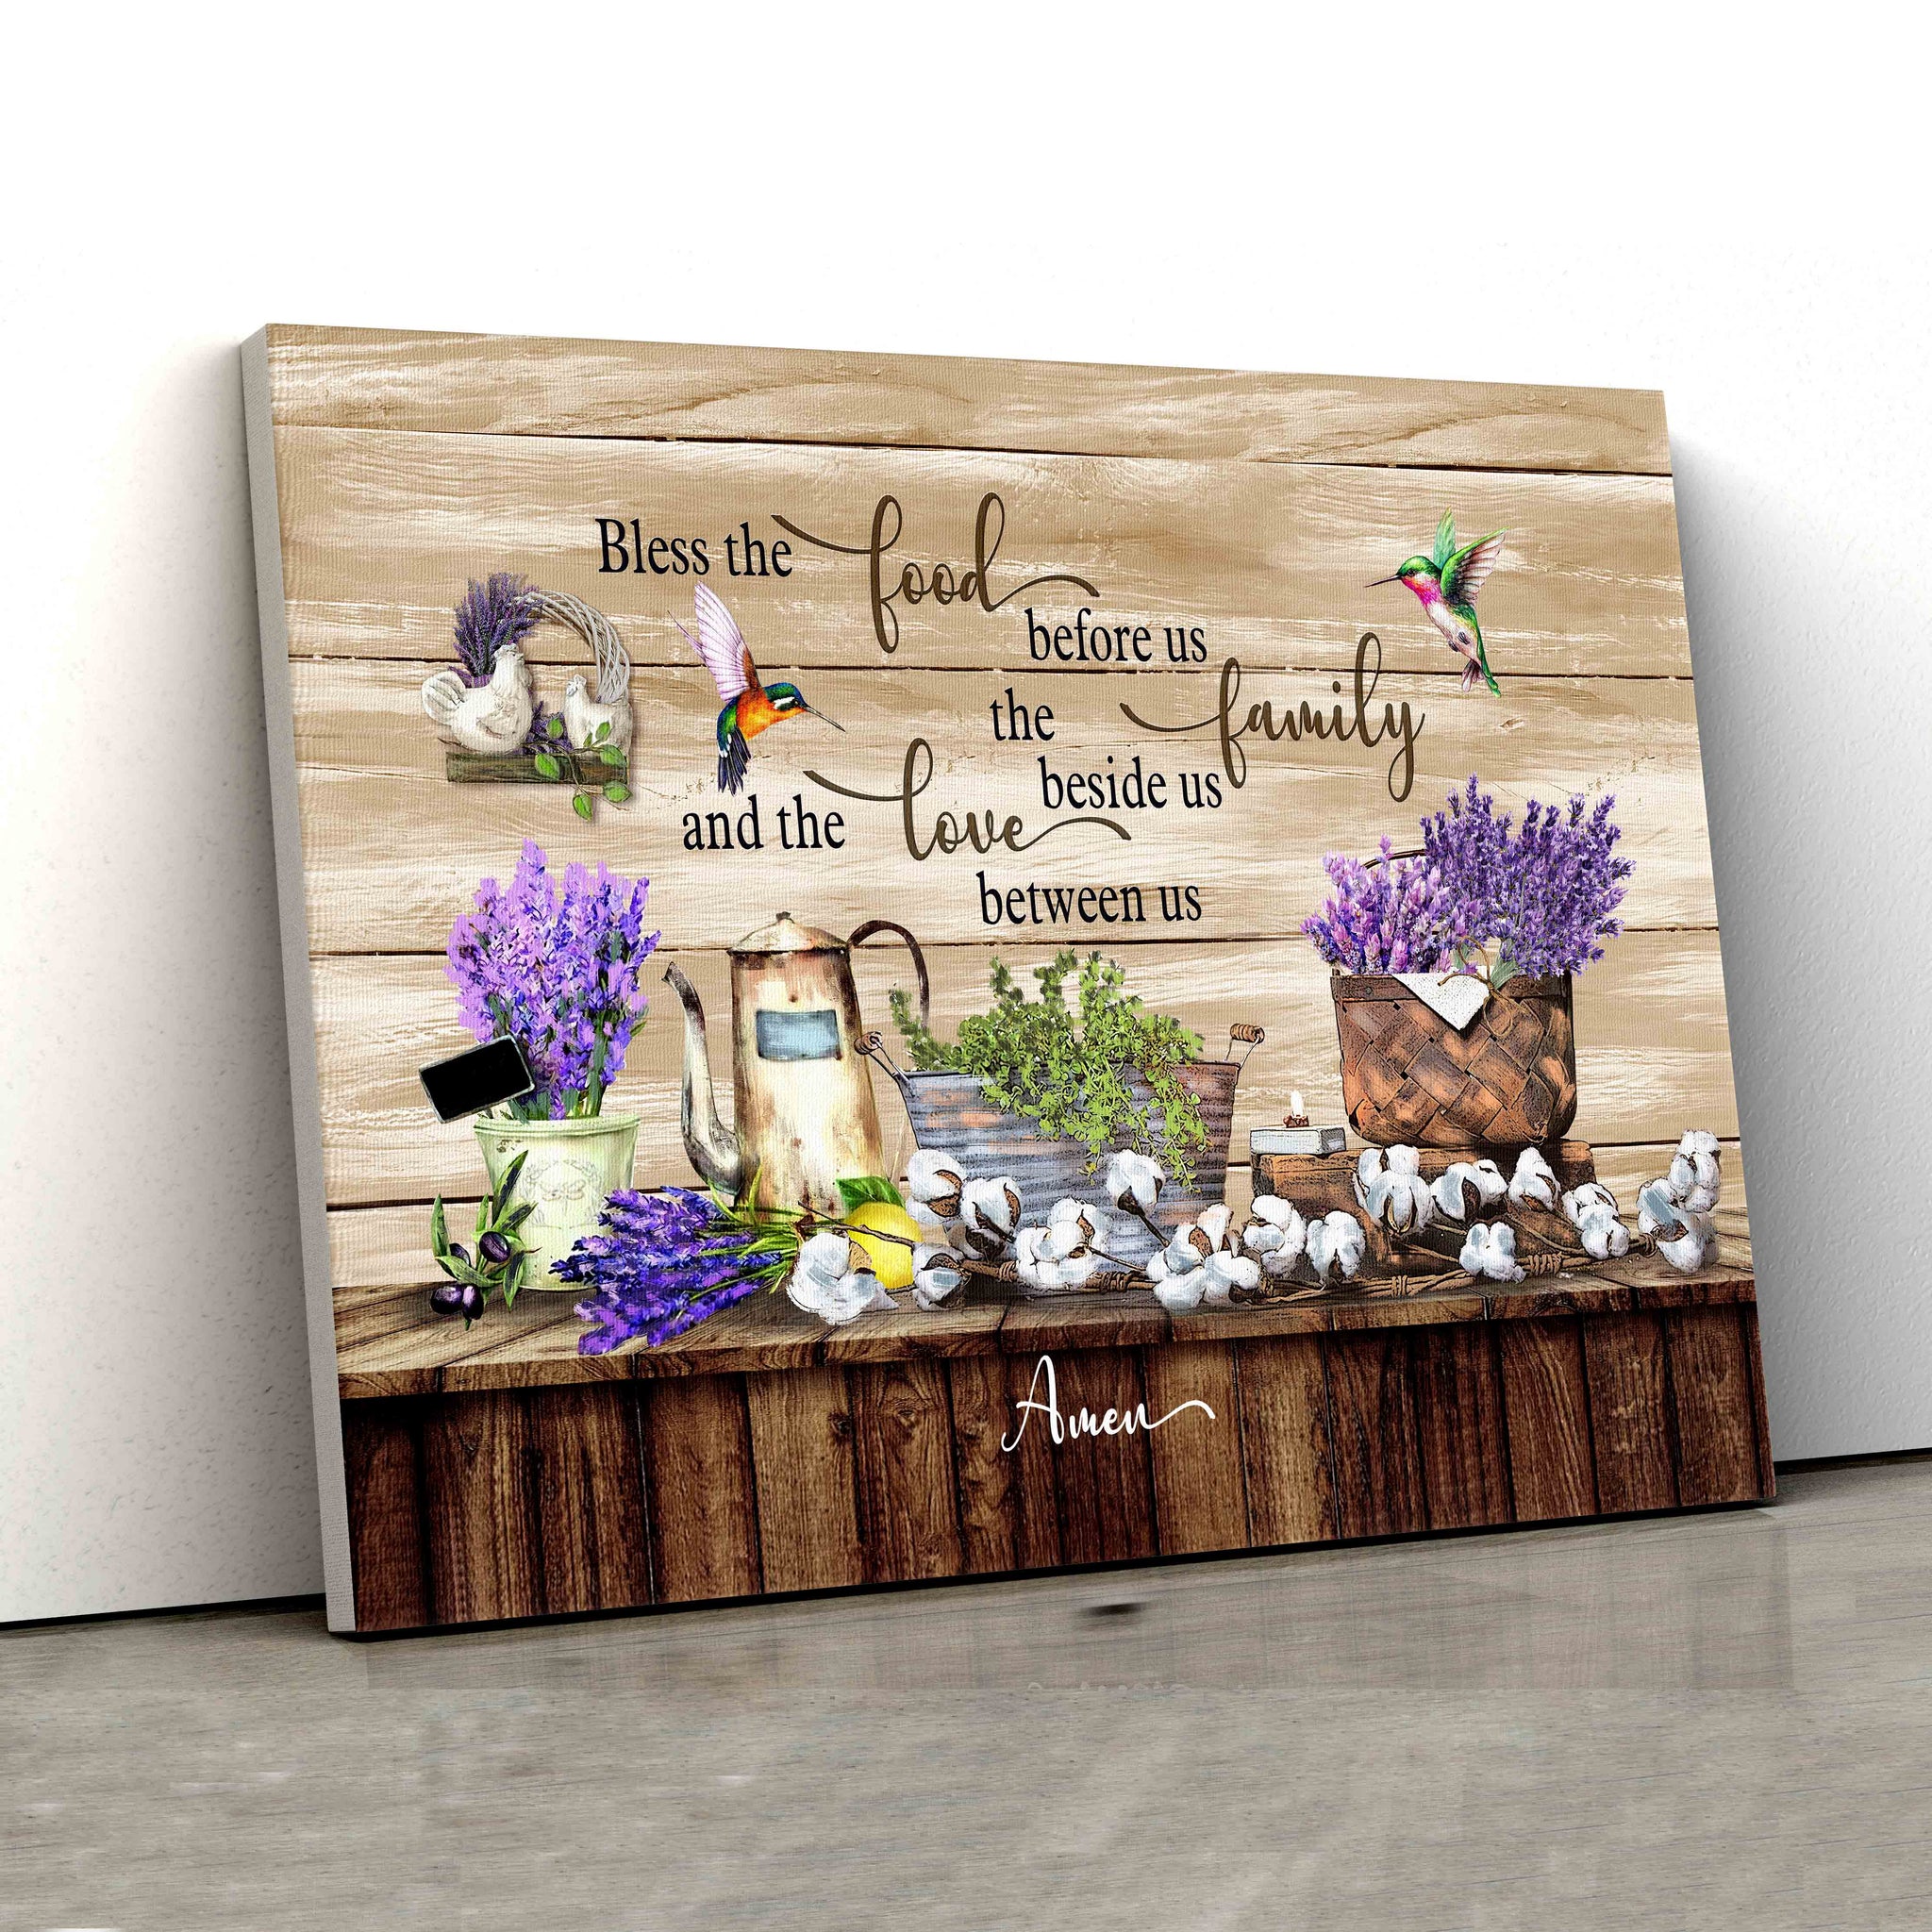 Bless The Food Before Us Canvas, Cotton Flower Canvas, Hummingbird Canvas, Lavender Canvas, Canvas Wall Art